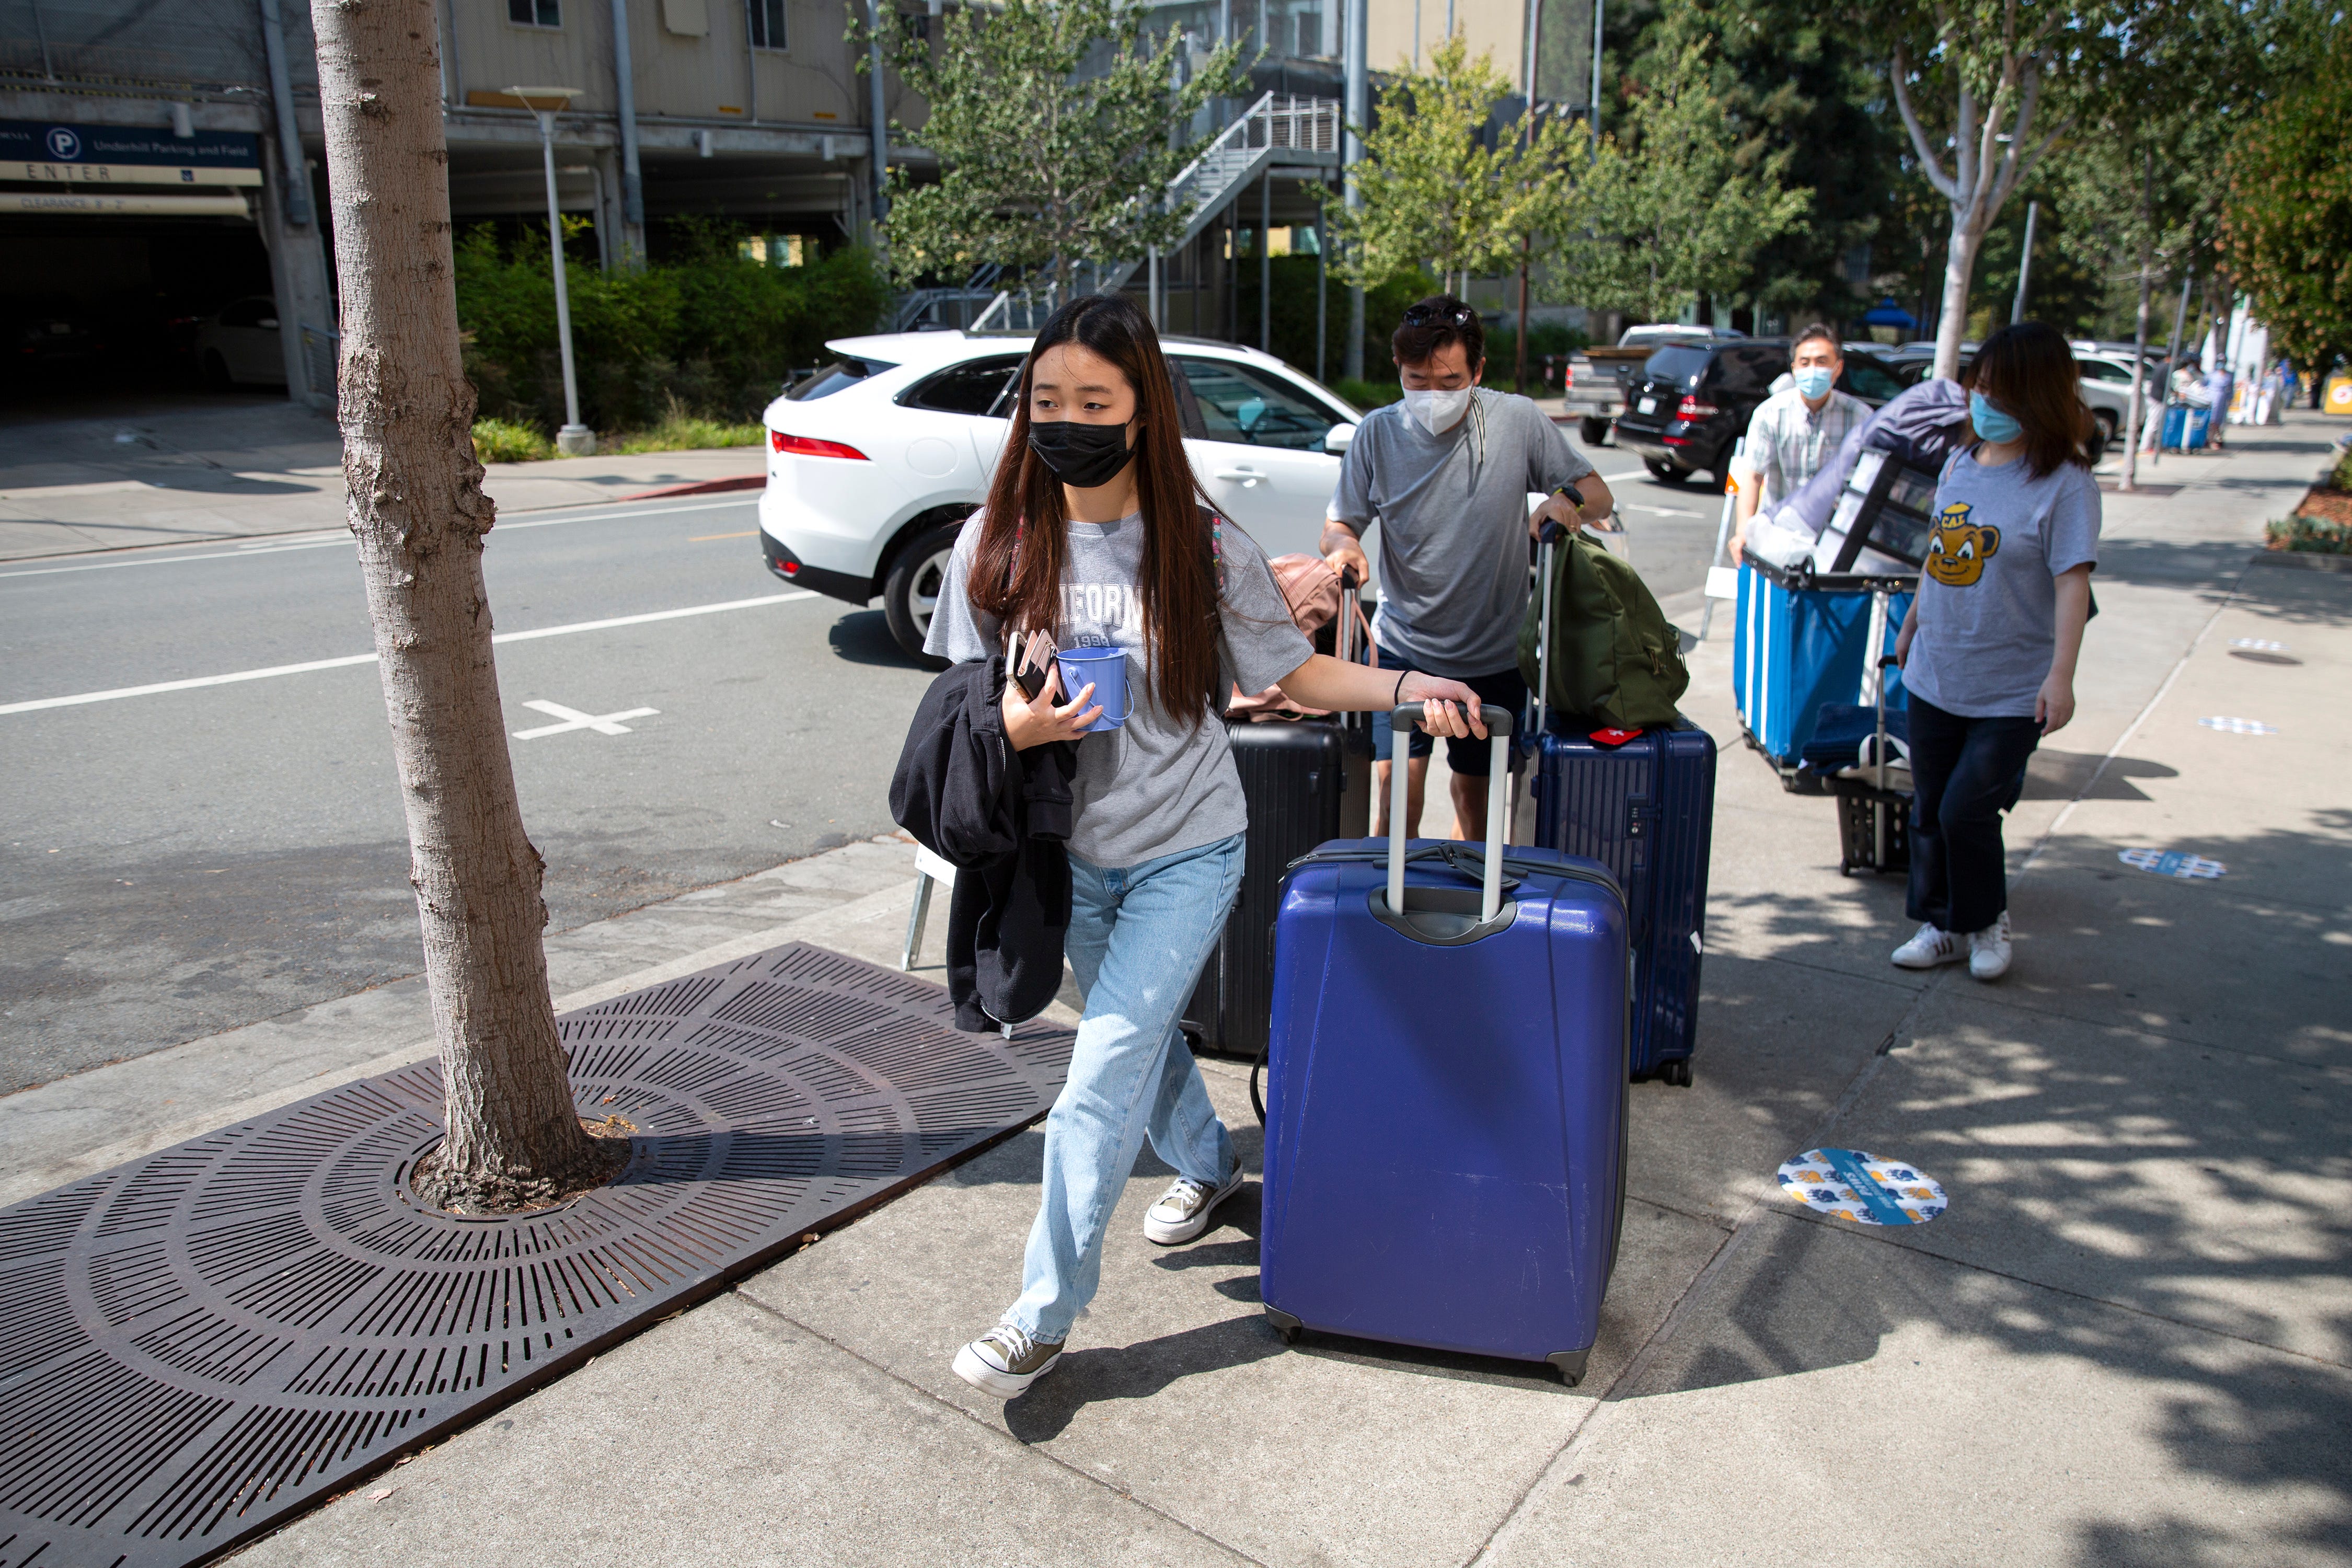 Daniella Choi, 18 from Los Angeles, pulls a suit case up to her dorm building as  she moves in on campus at the University of California, Berkeley on Aug. 16, 2021.